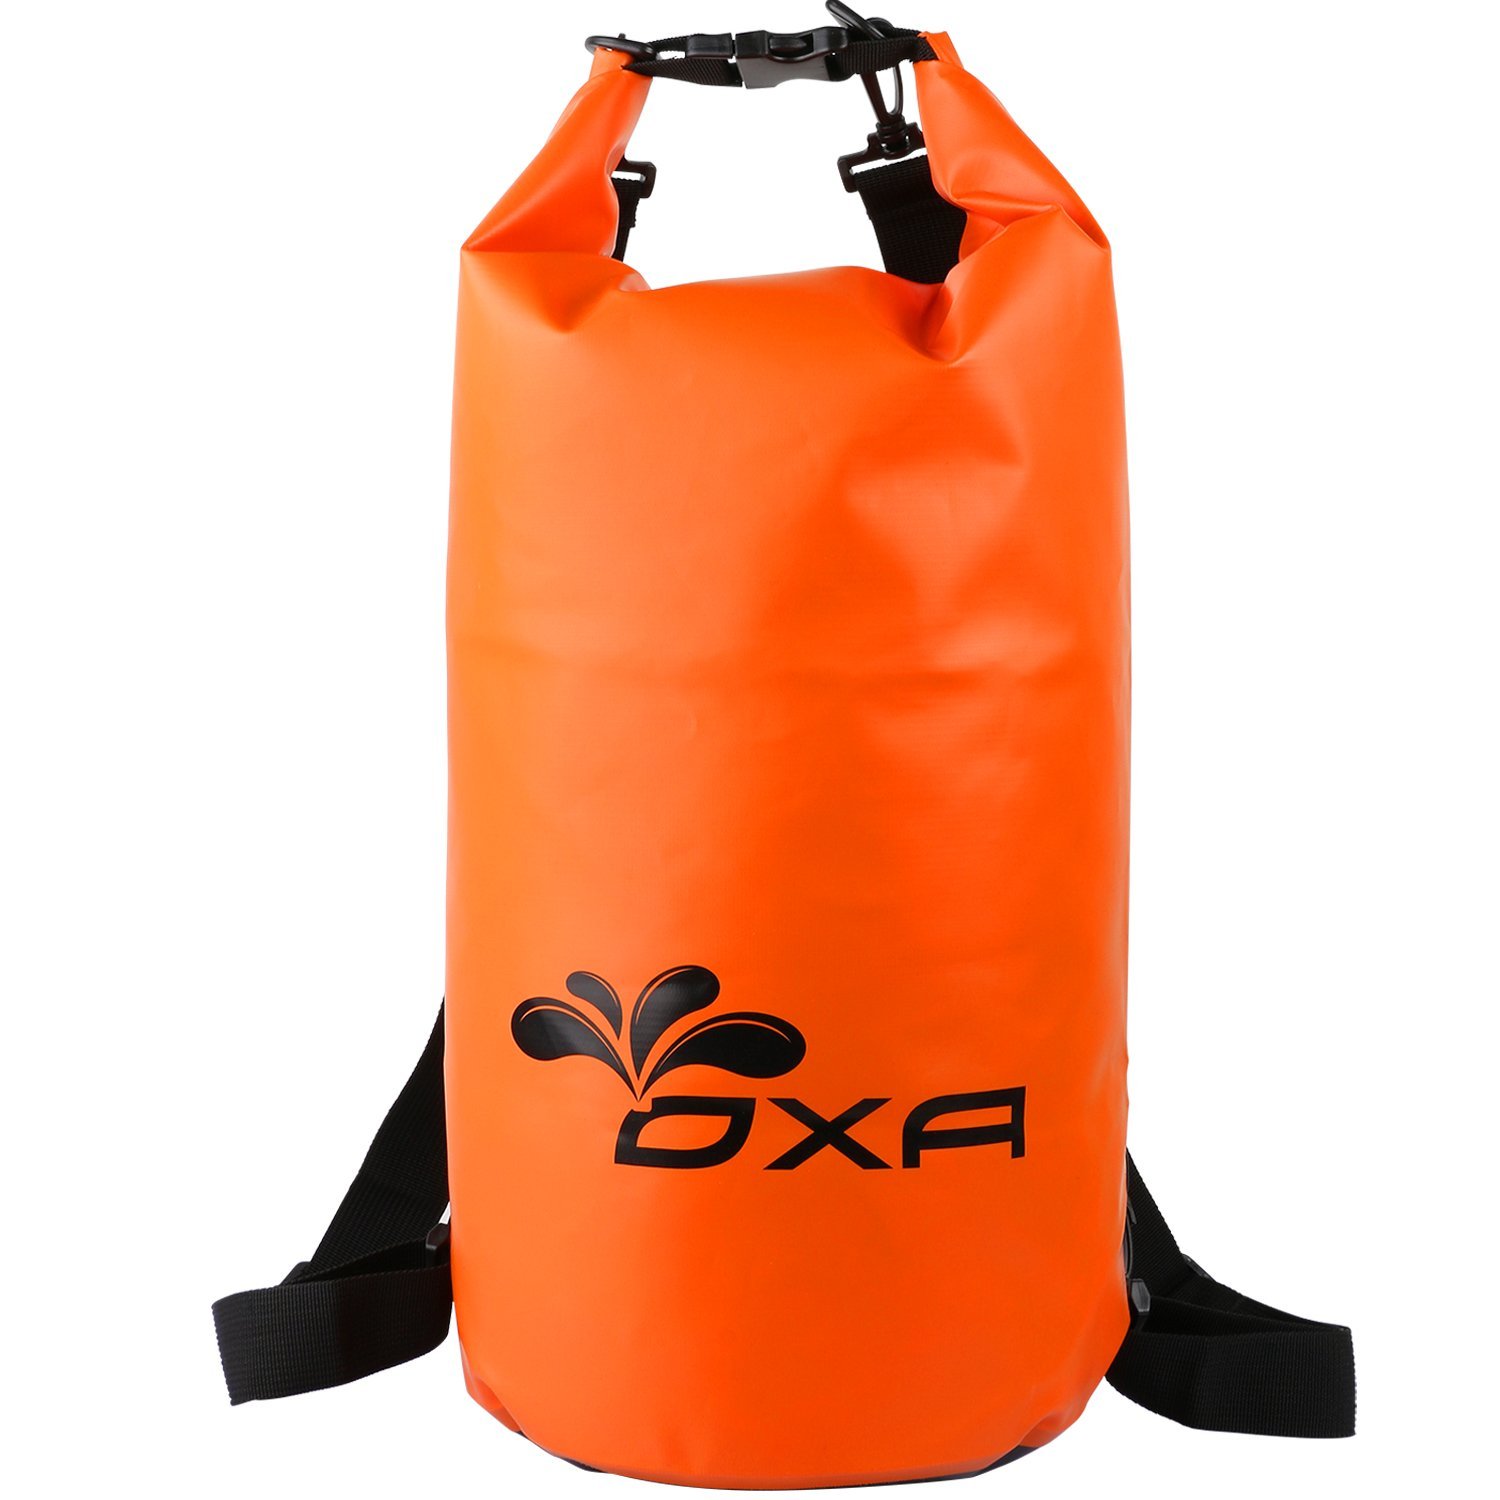 OXA 20L Waterproof Dry Bag with Dual Shoulder Straps – Just $8.32!